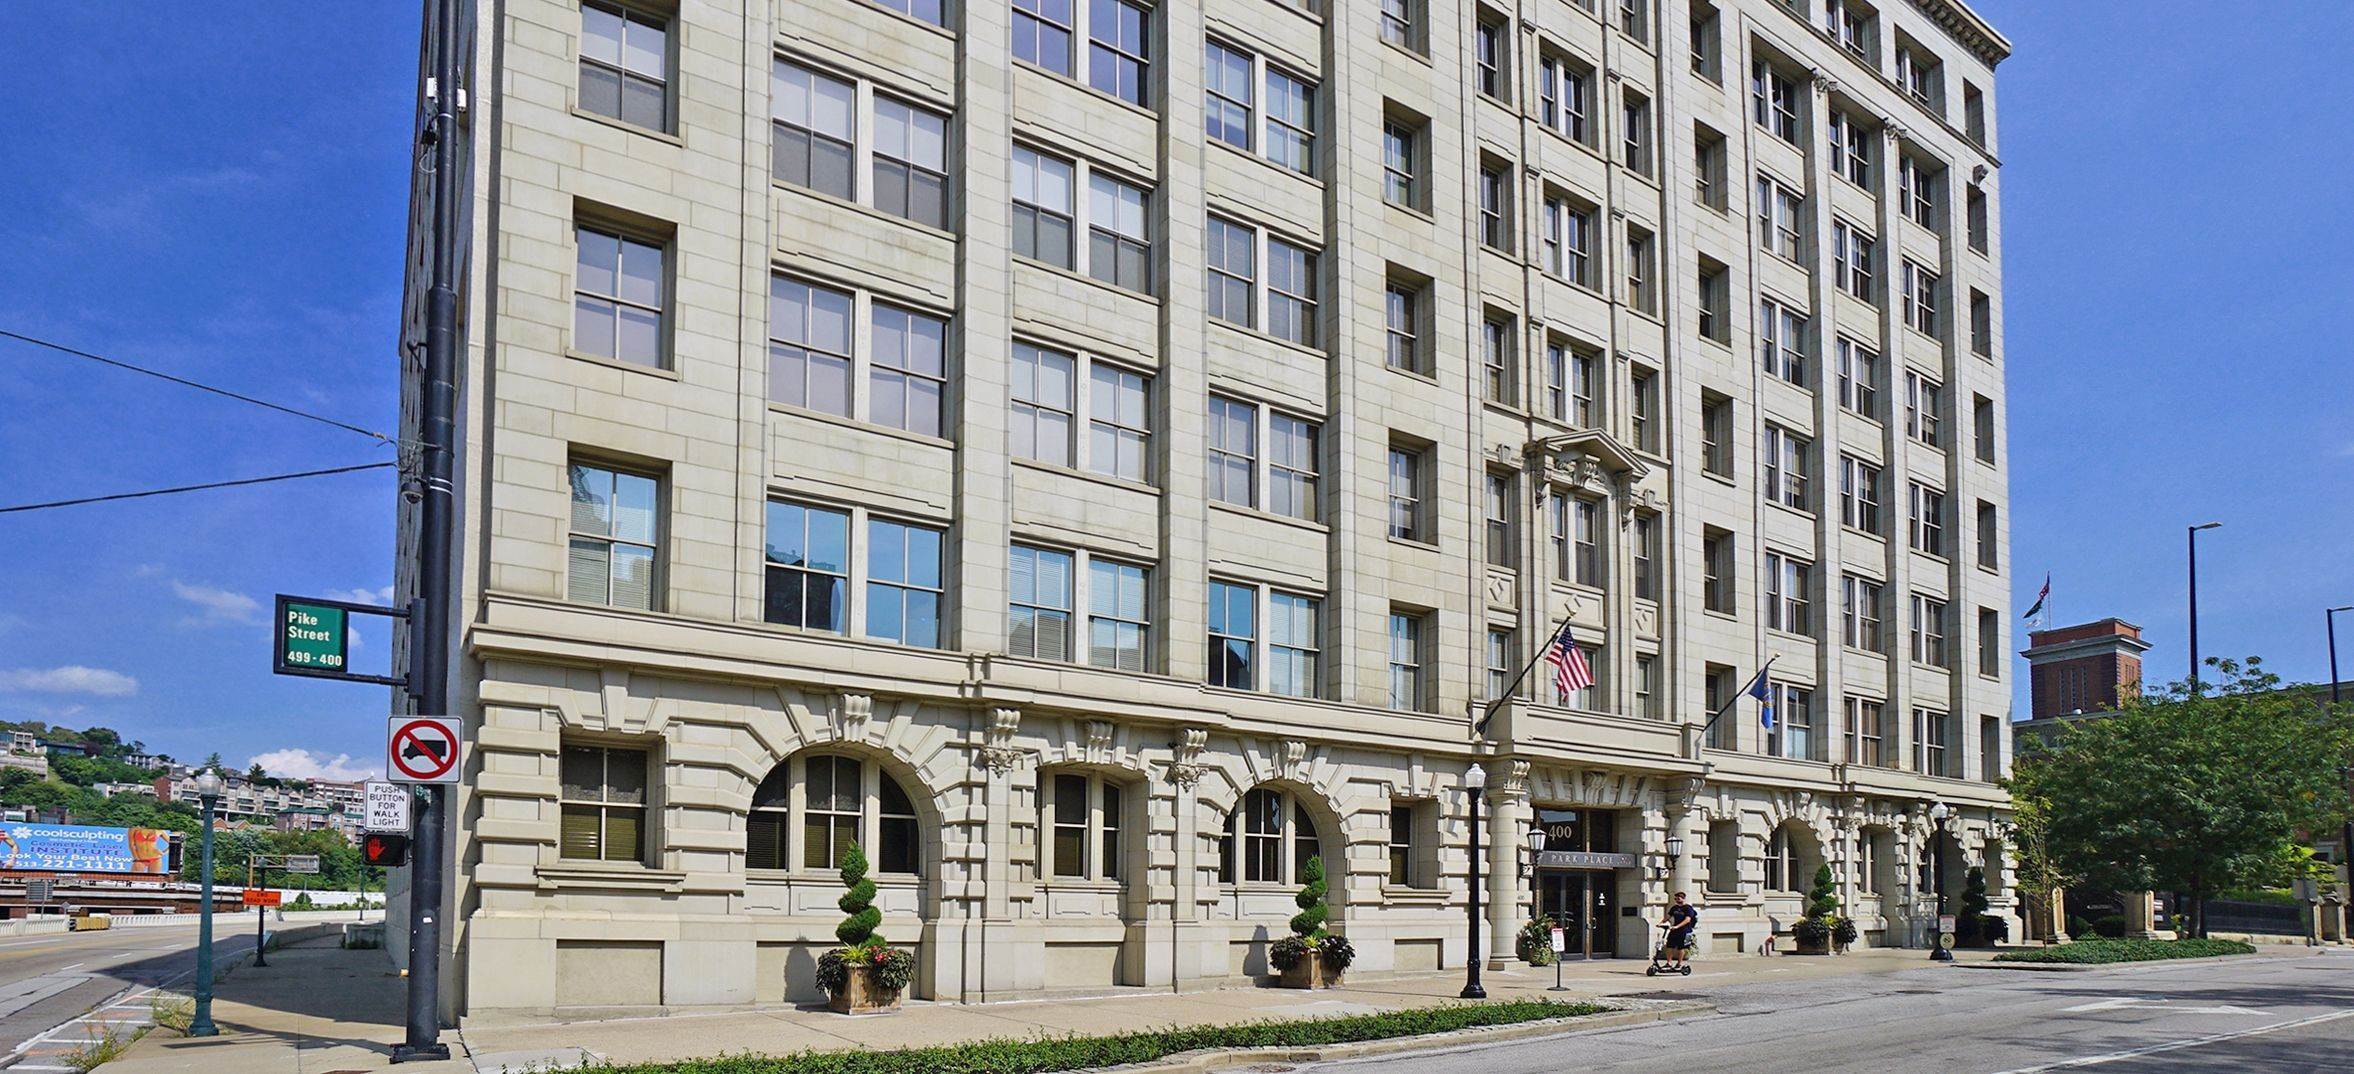 2. Condominiums for Sale at 400 Pike Street #914, Cincinnati, OH 45202 400 Pike Street #914 Cincinnati, Ohio 45202 United States